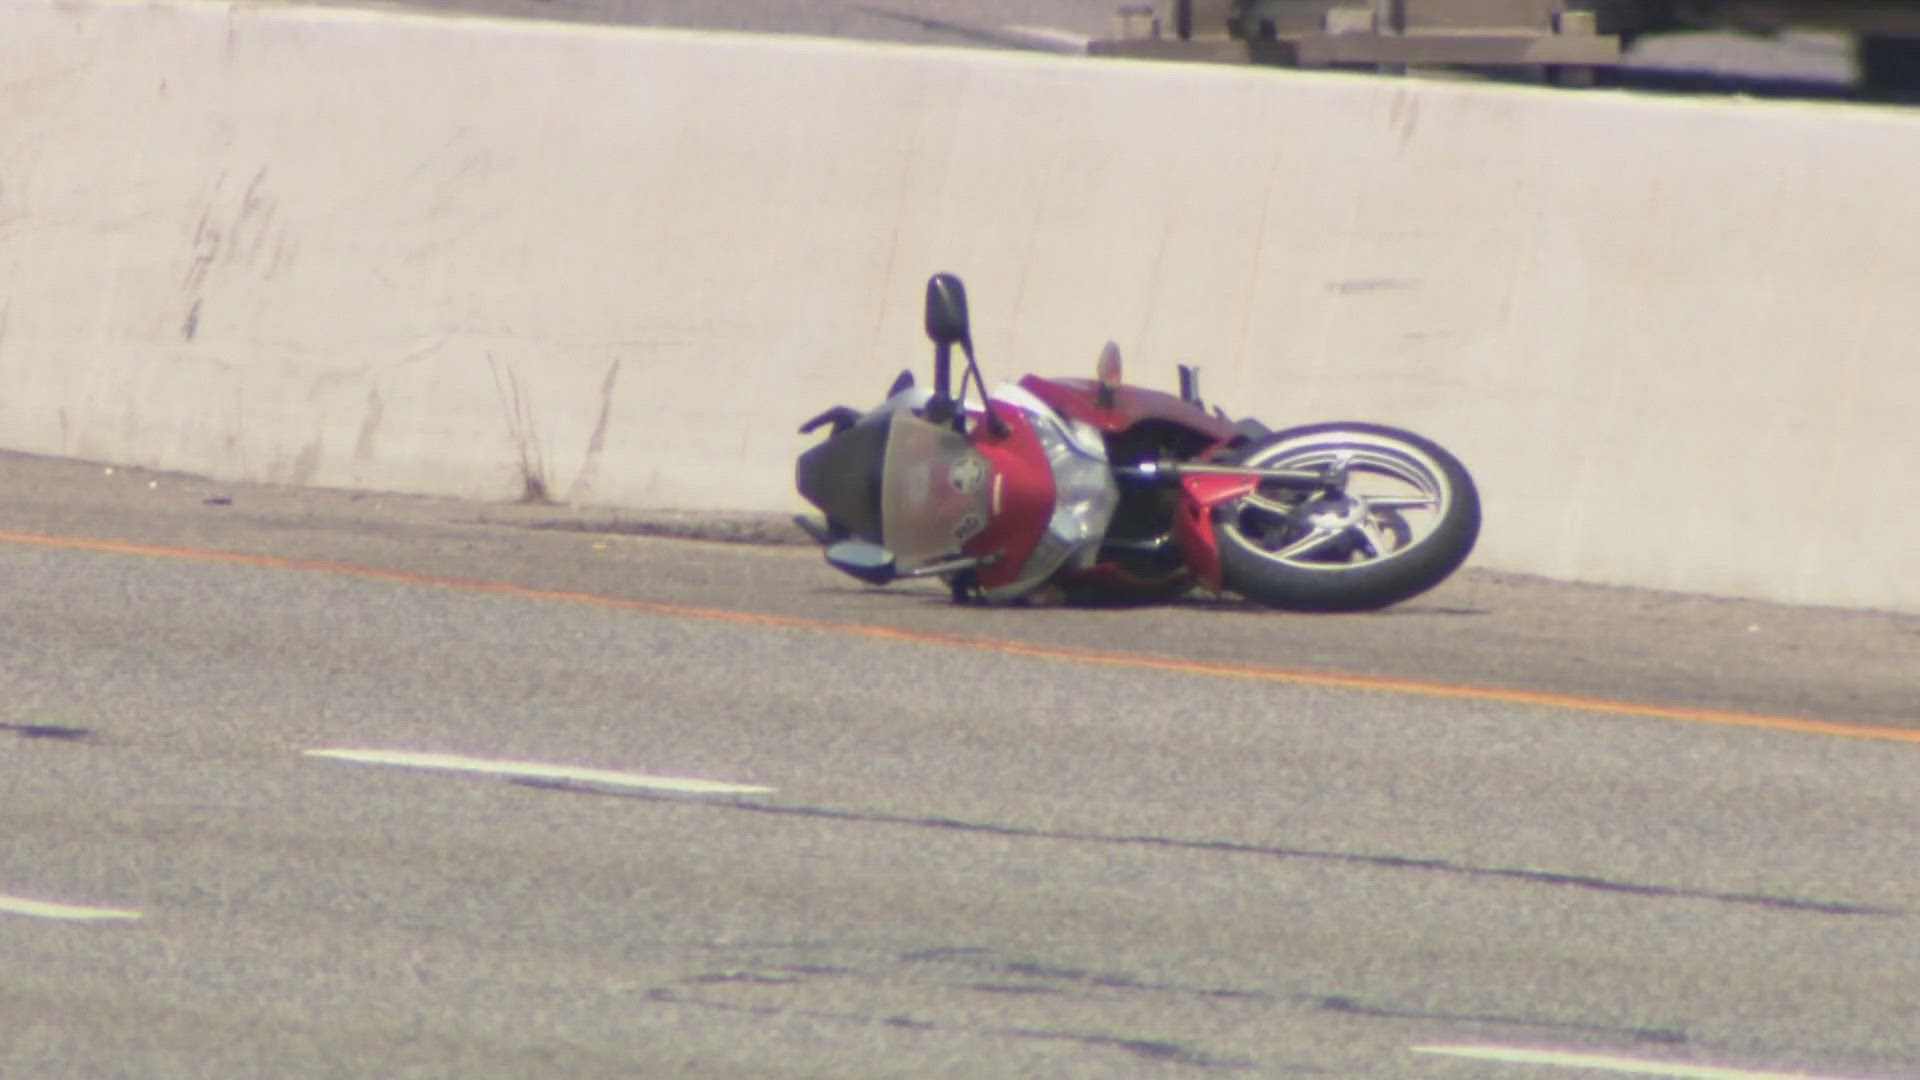 Police say a man on a motorcycle was weaving in and out of traffic when he was hit by a car. The man died at the scene and the crash remains under investigation.